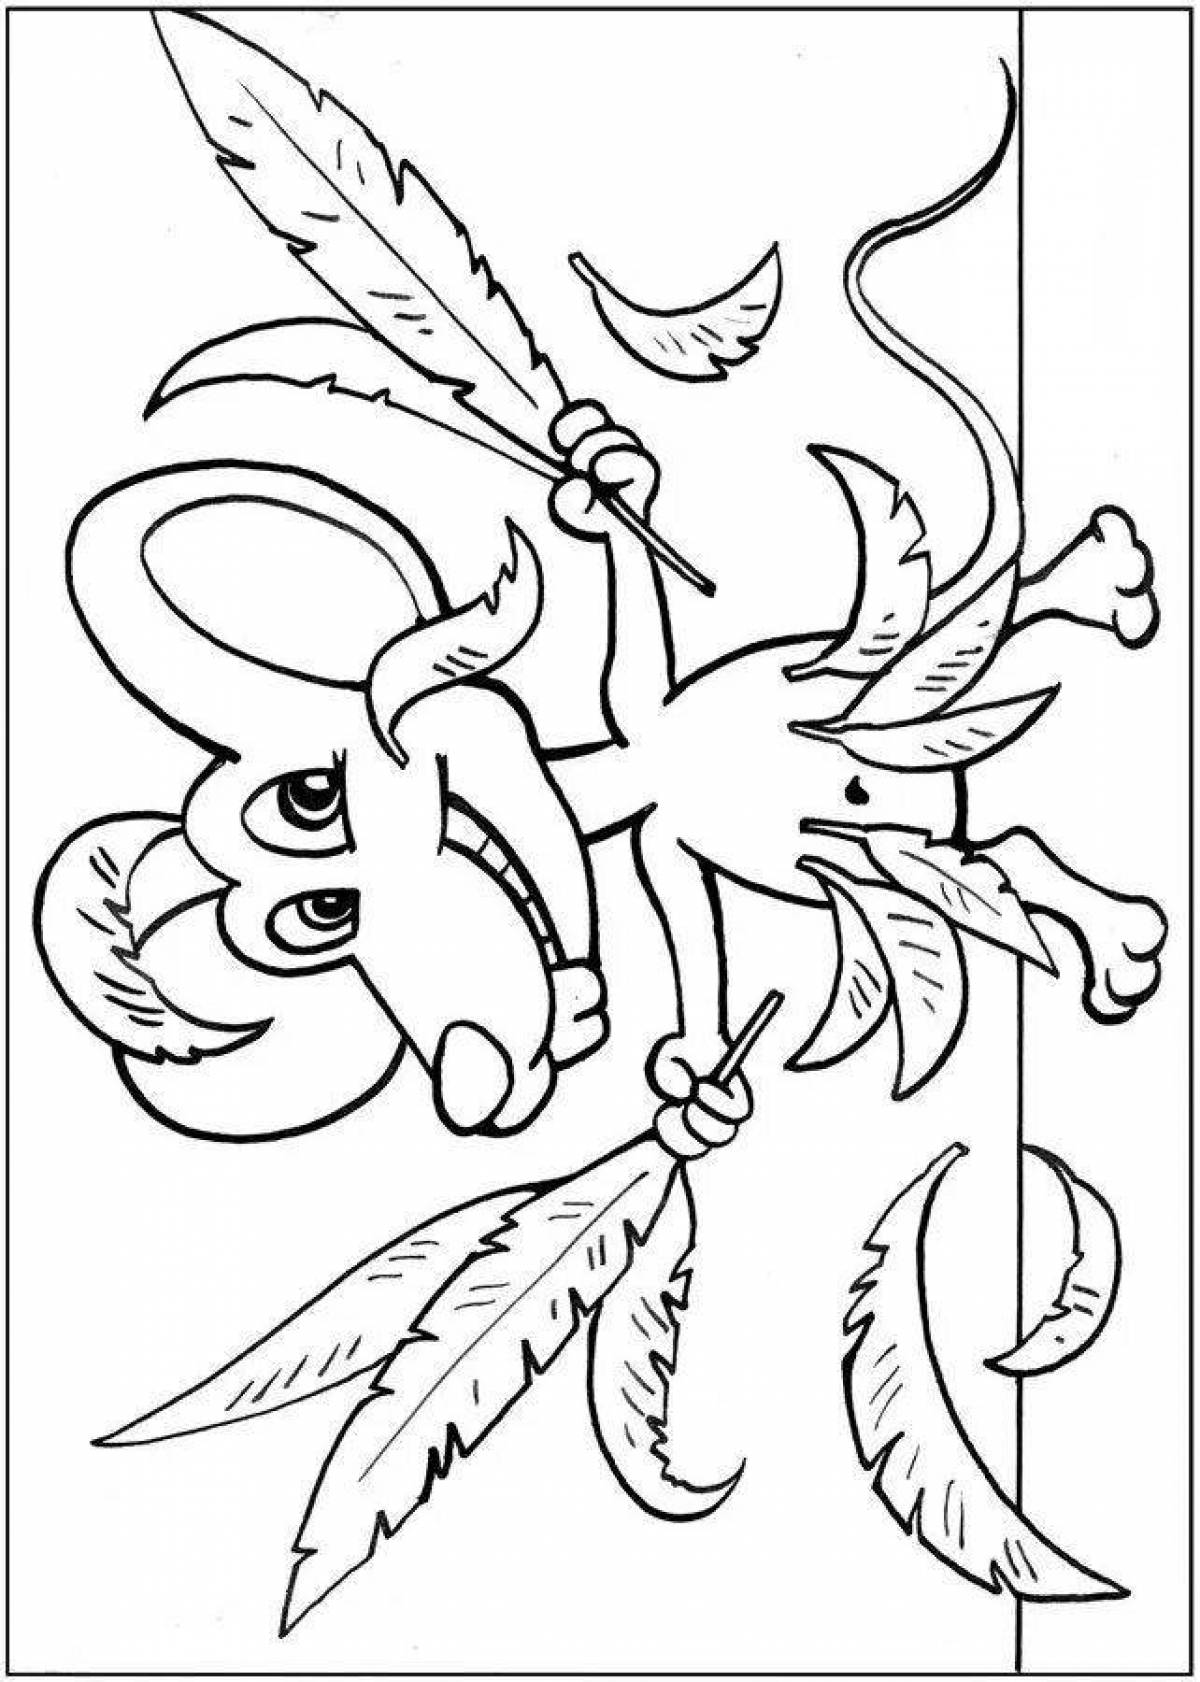 Impressive horns and hooves coloring page